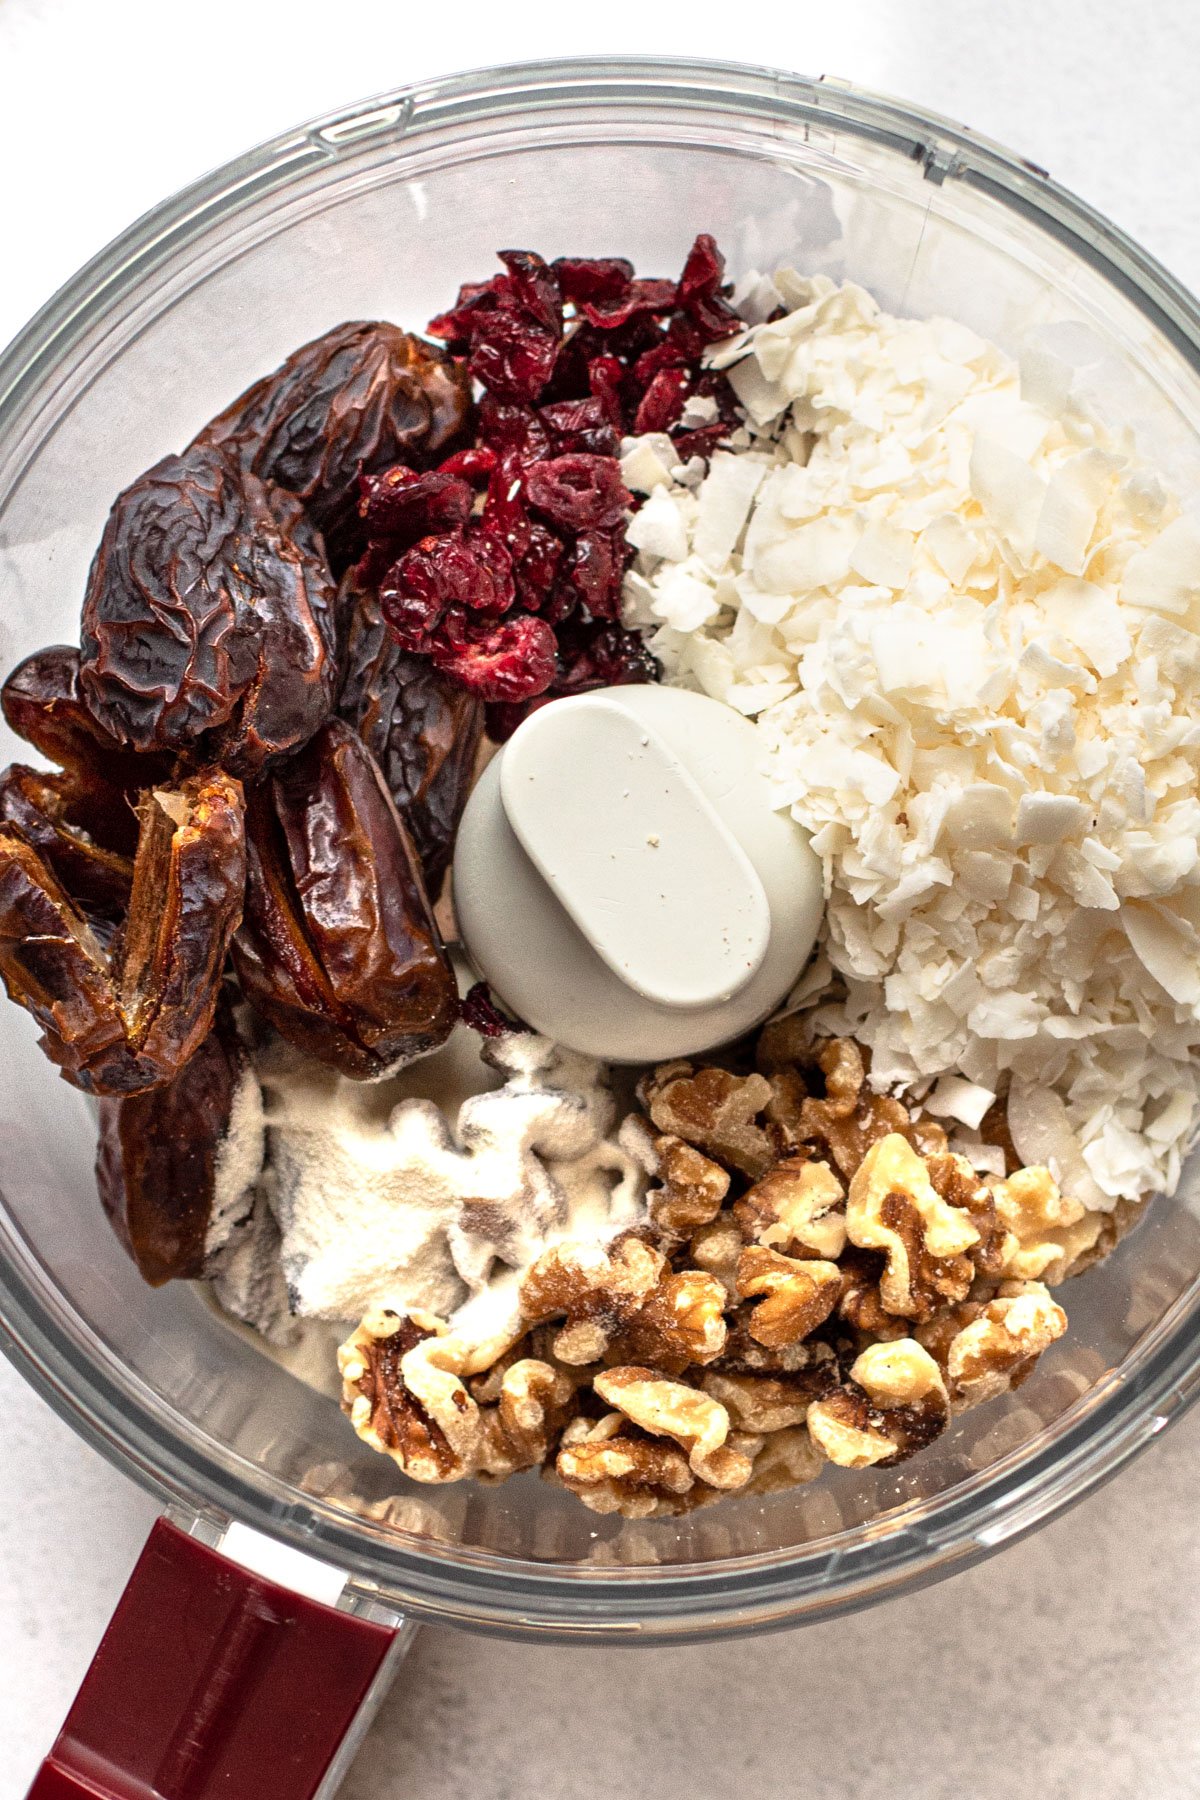 Ingredients in a food processor for cranberry coconut bars.